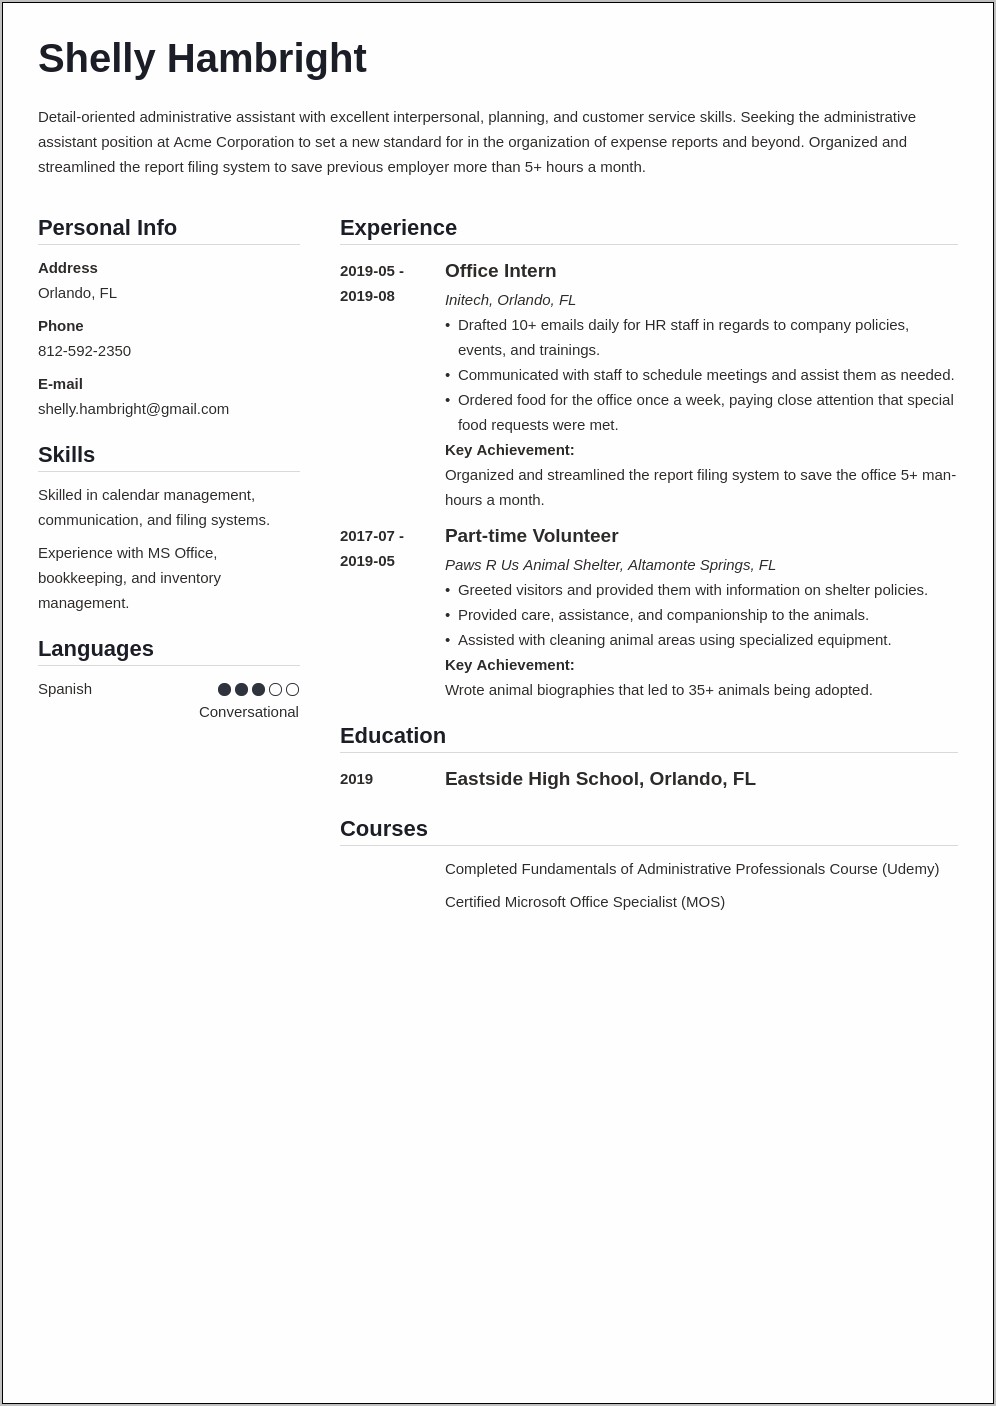 A Good Administrative Assistant Summary For A Resume